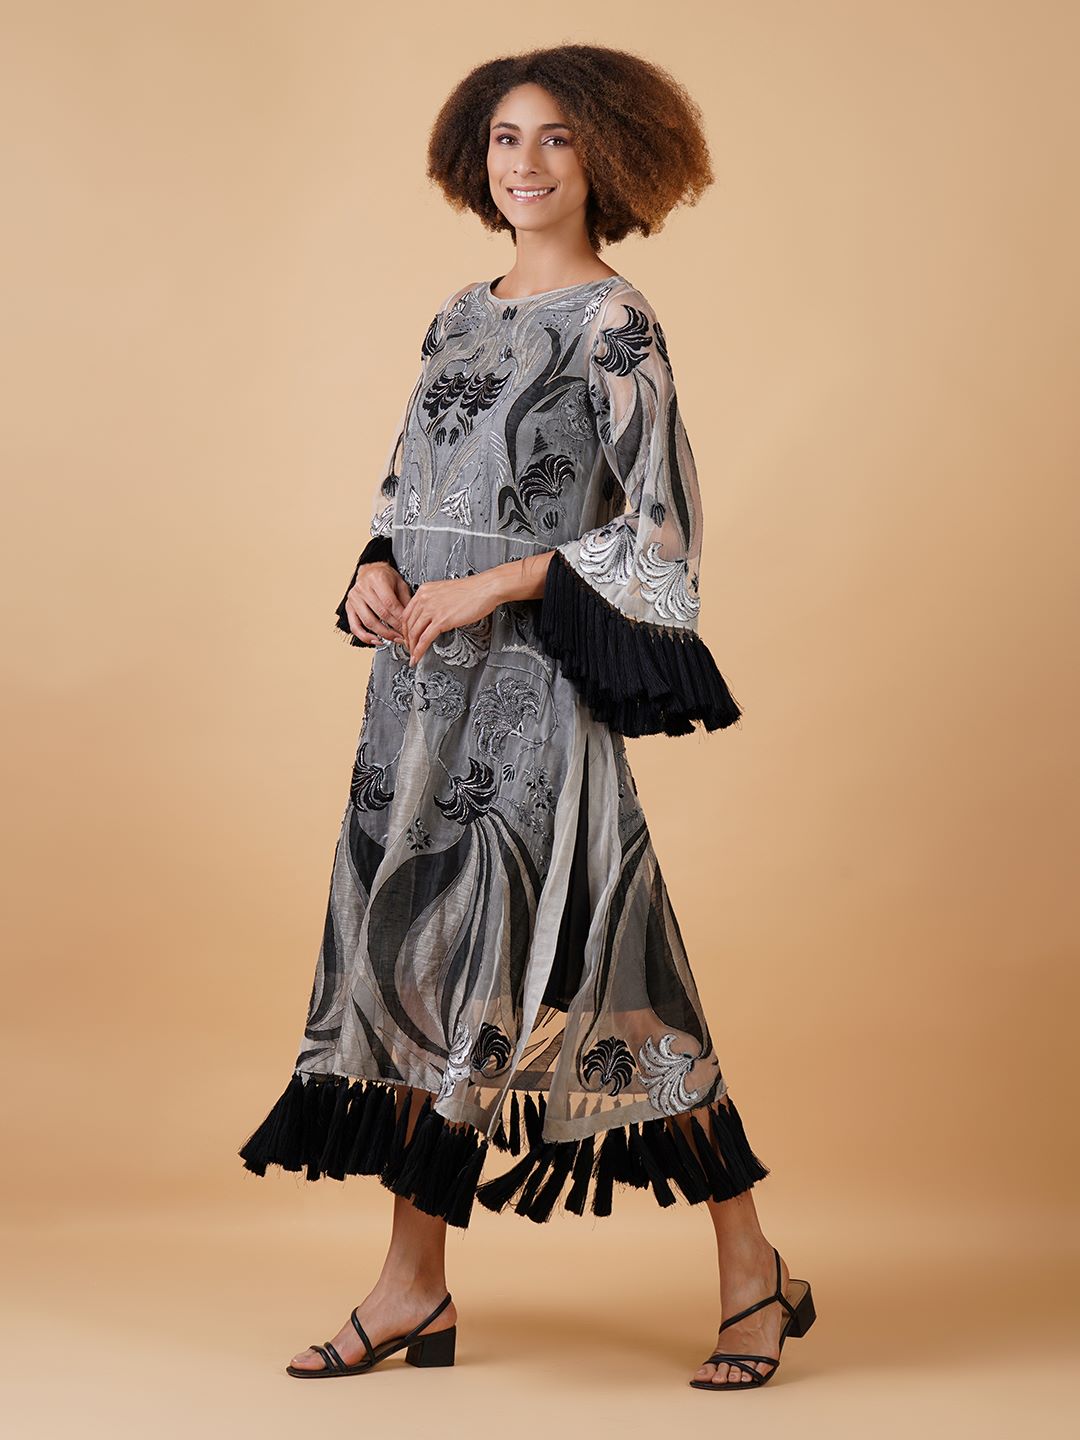 An organza base dress that is adorned with appliqué work in beautiful patterns